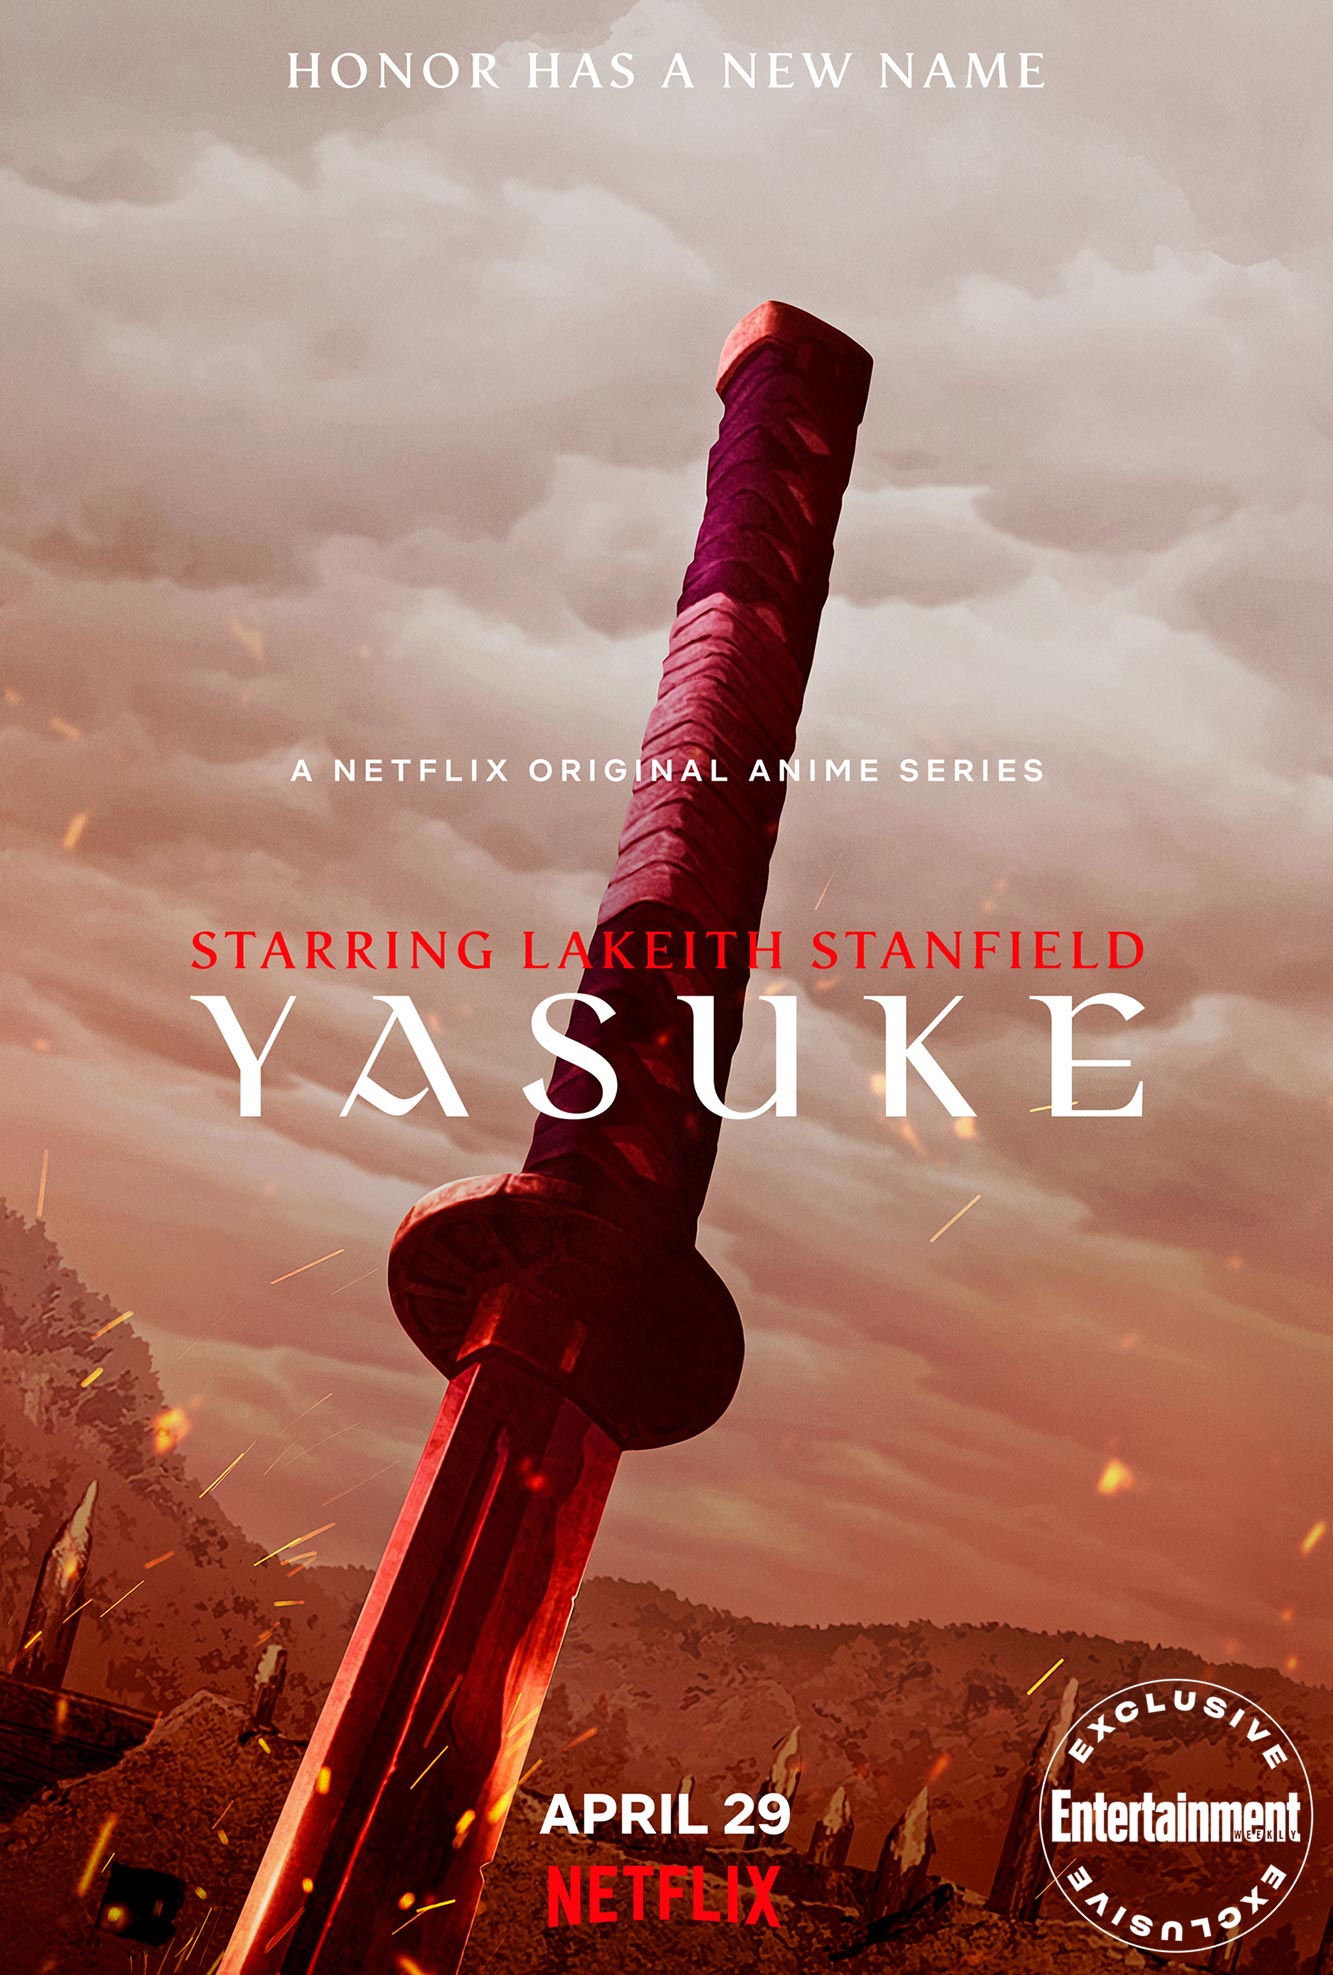 LaKeith Stanfield becomes Yasuke, the first African samurai, in debut trailer for Netflix anime series